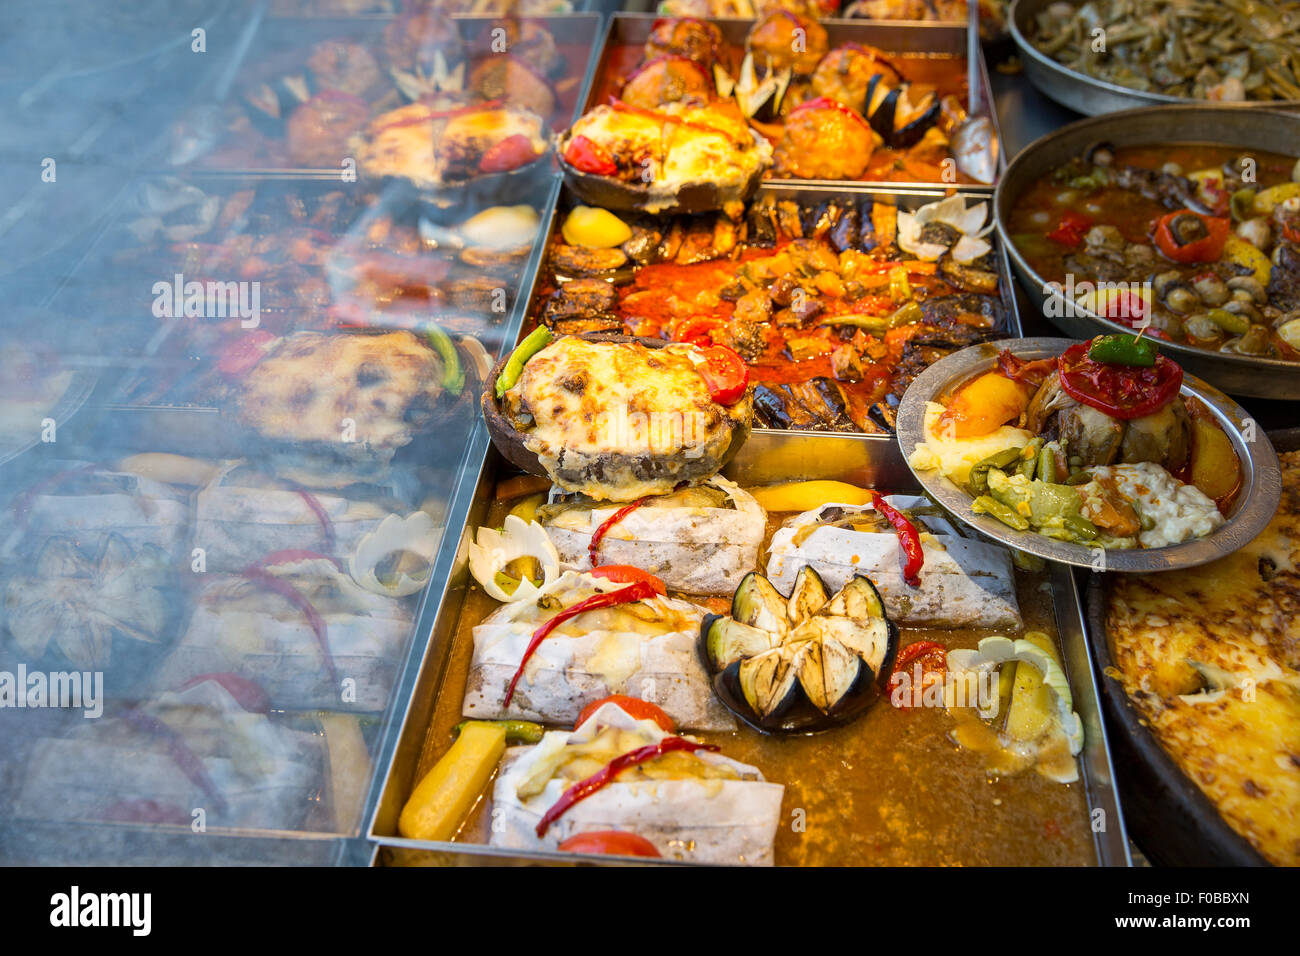 Traditional colorful Turkish food near showcase in a restaurant Stock Photo